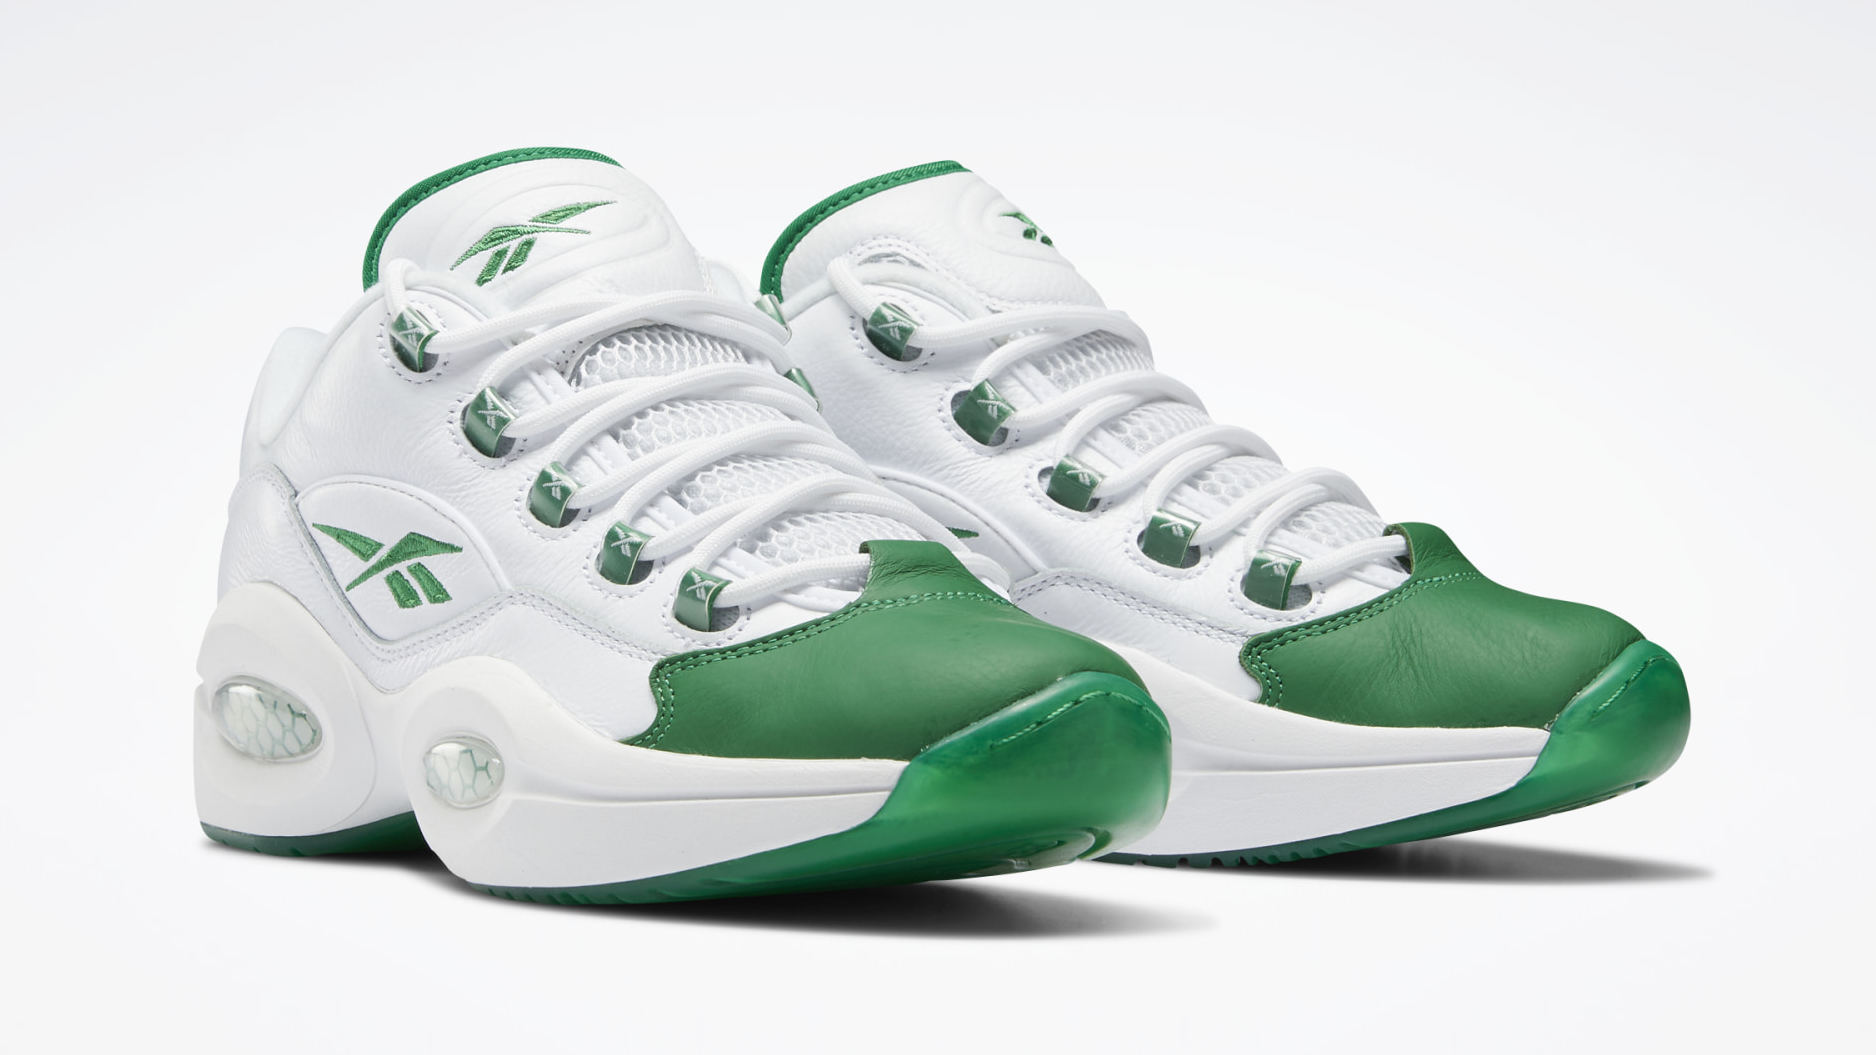 Boston's Basketball History Inspires This Reebok Question Low